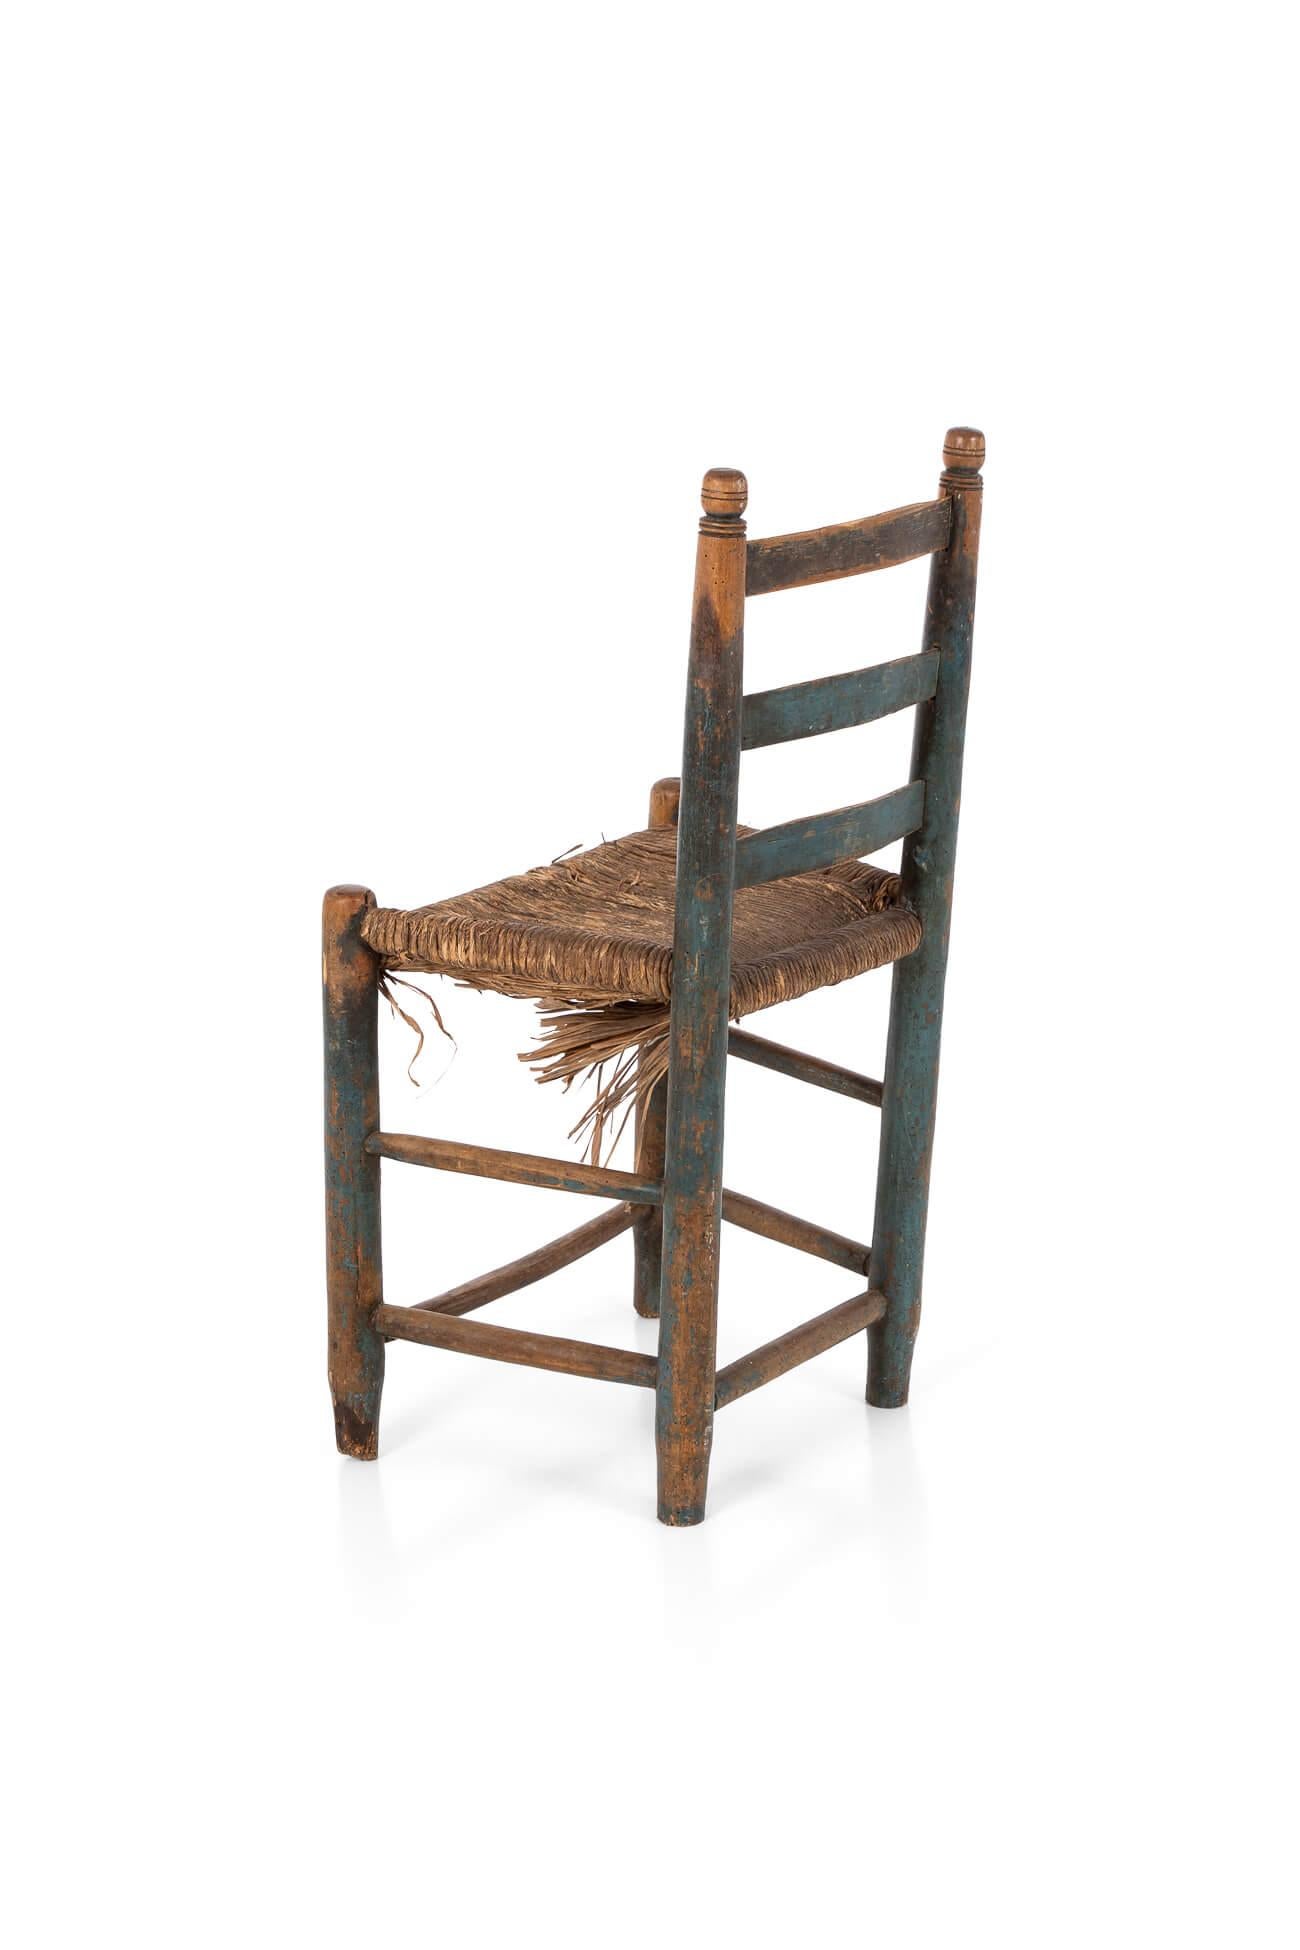 Rustic Primitive Rush Seat Side Chair For Sale